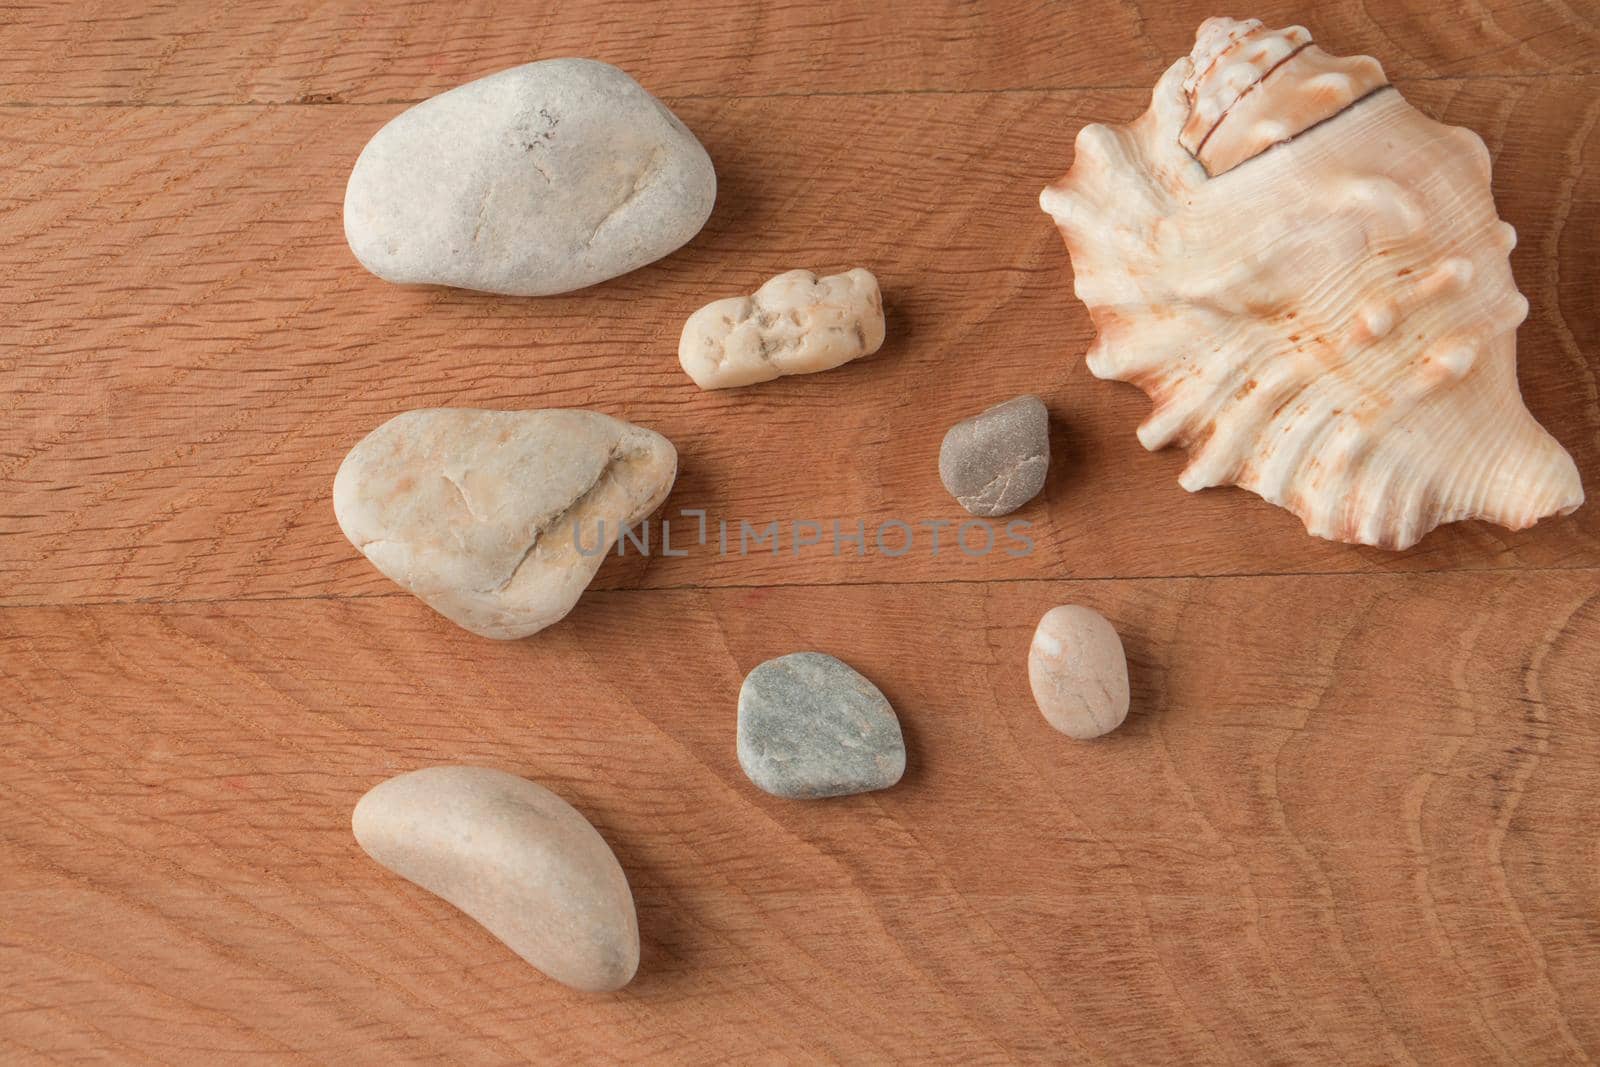 Smooth stones of various sizes and a shell on the background of a wooden board